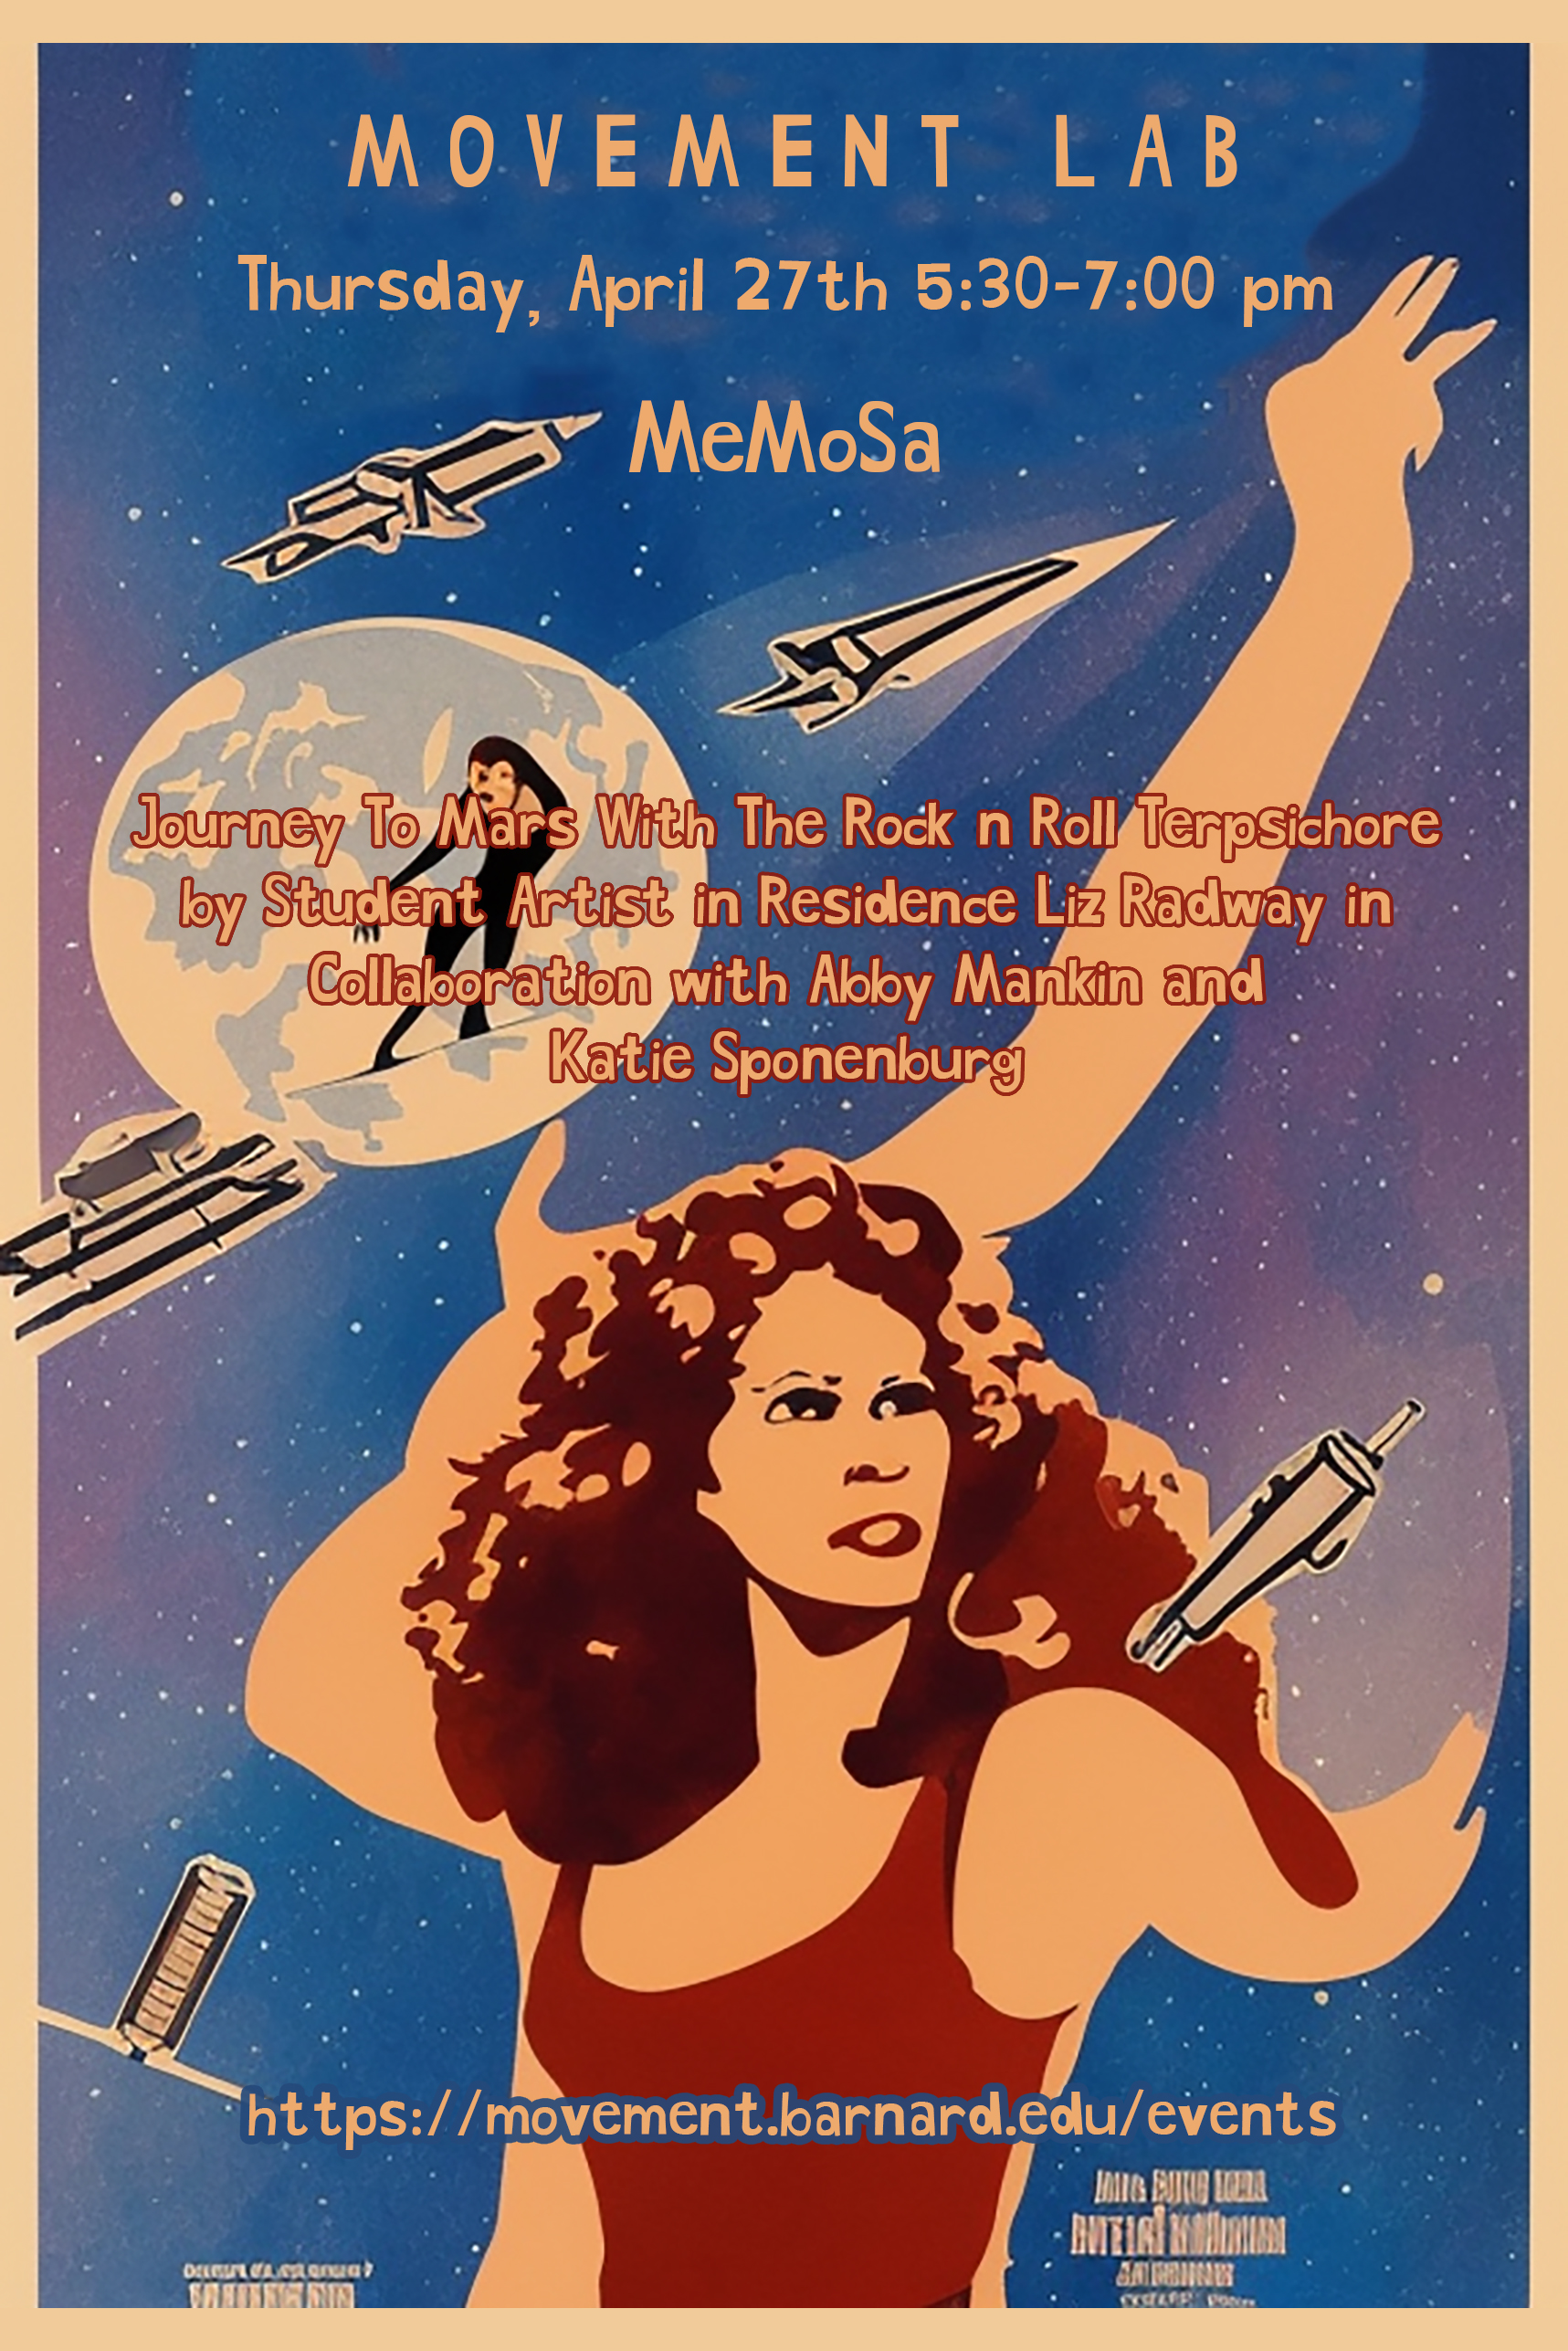 MeMoSa: Journey To Mars With The Rock n Roll Terpsichore by Student Artist in Residence Liz Radway in Collaboration with Abby Mankin and Katie Sponenburg